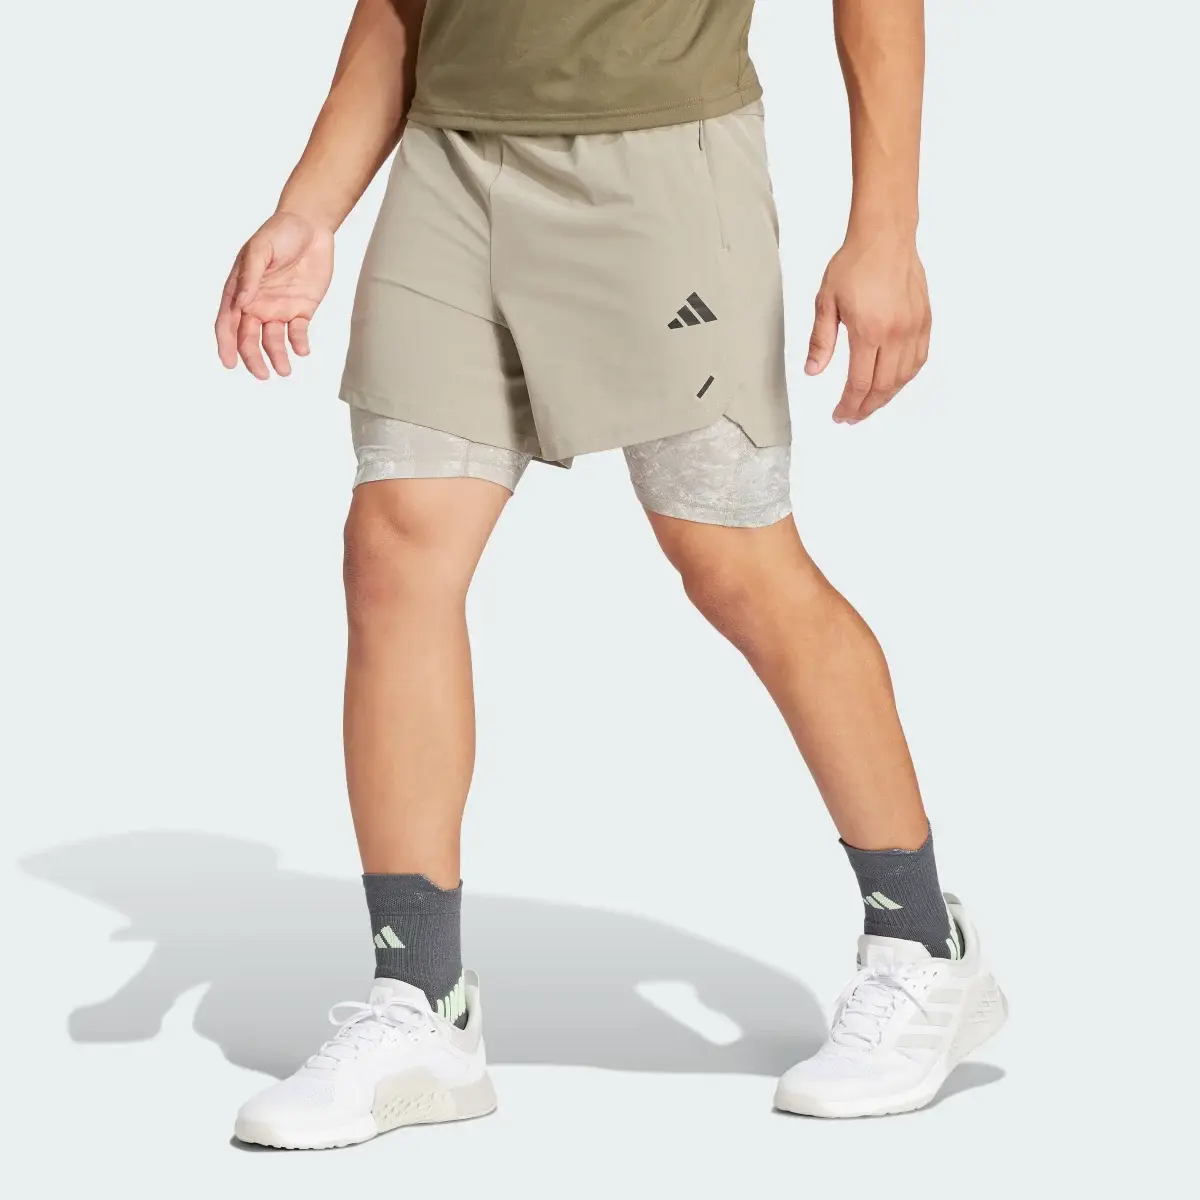 Adidas Power Workout 2-in-1 Shorts. 1